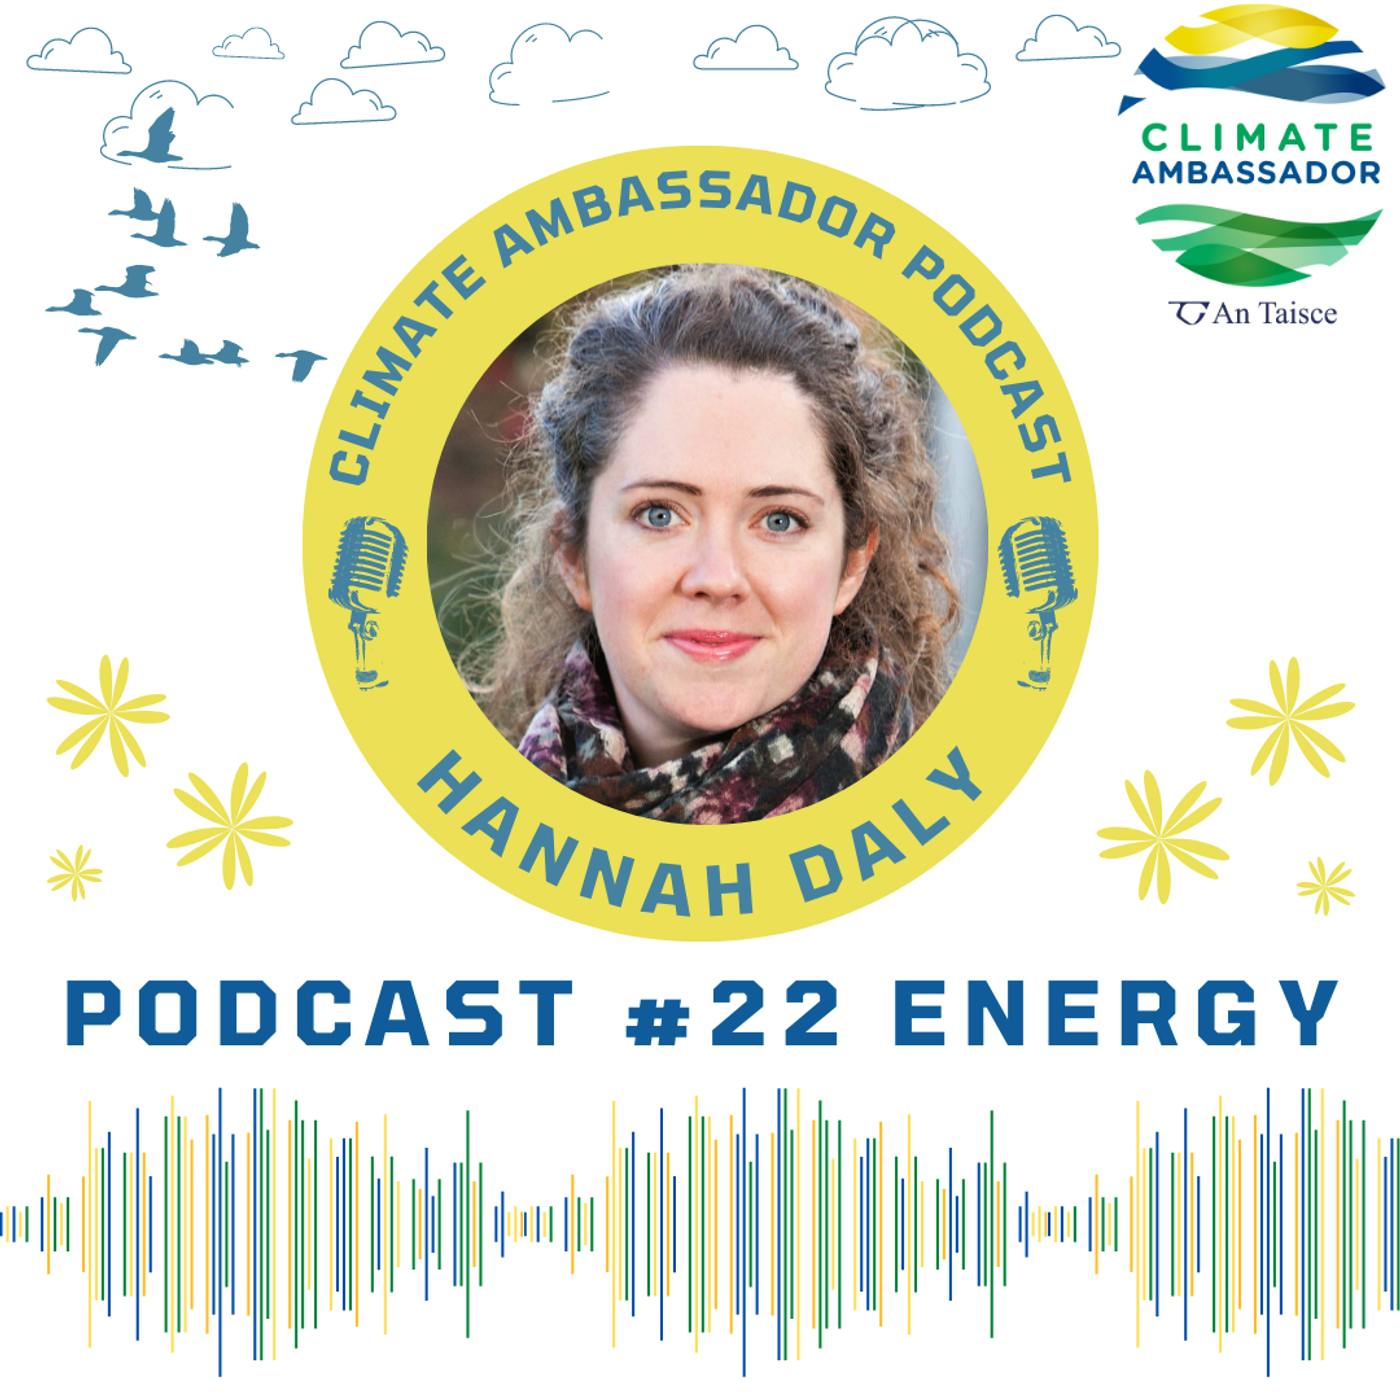 22: Energy with Prof. Hannah Daly